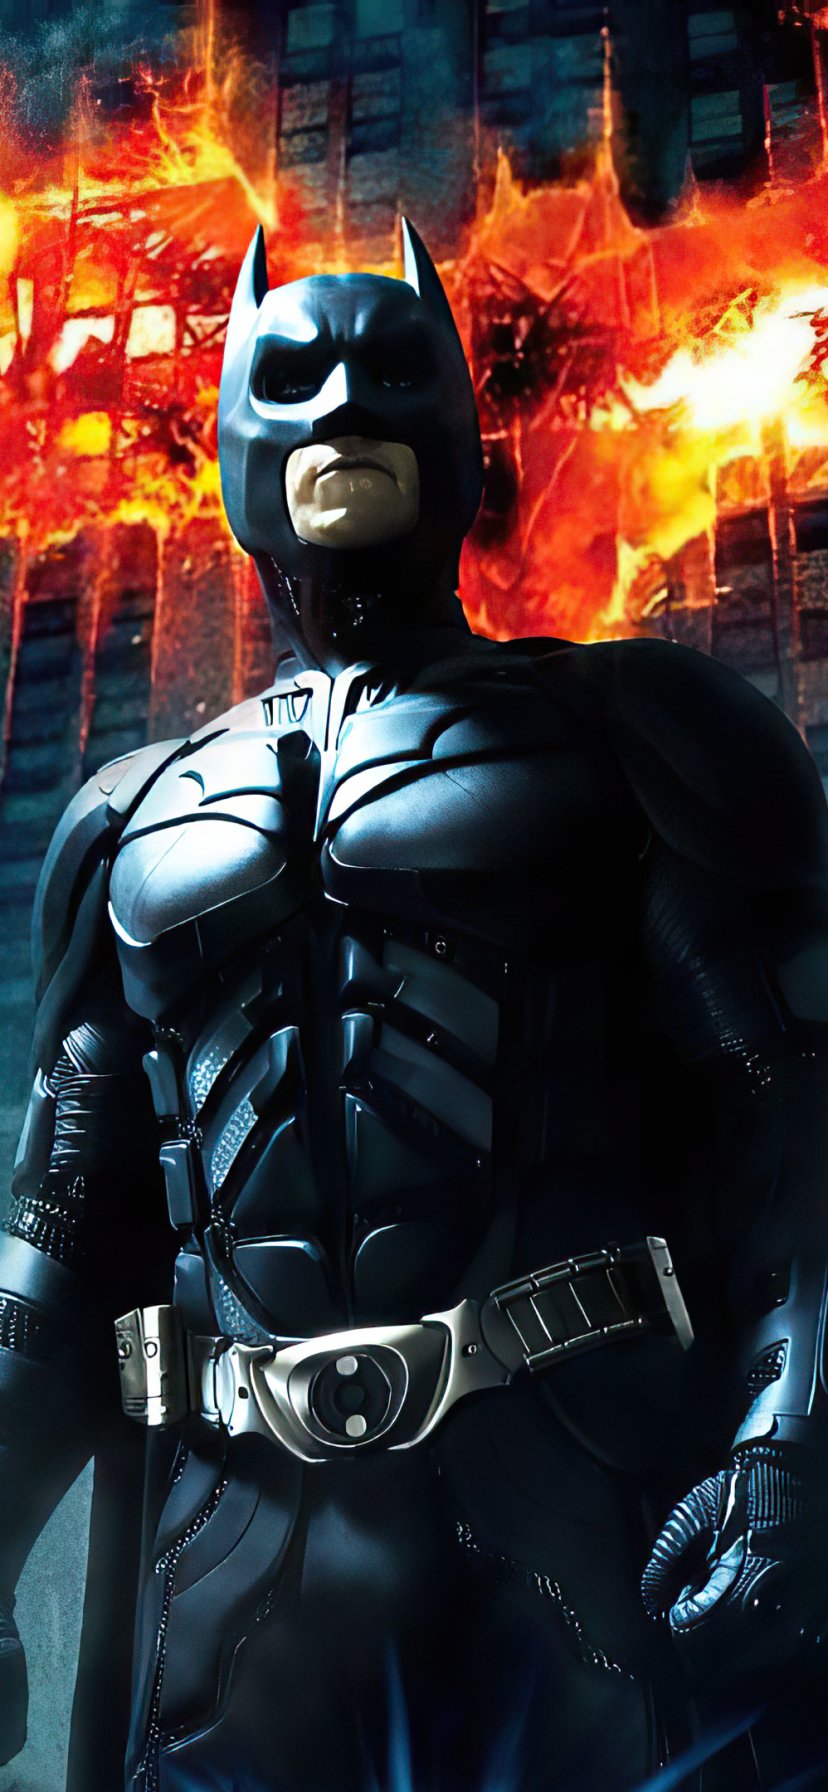 Mobile wallpaper: Batman, Movie, The Dark Knight, Bruce Wayne, Christian Bale, 1174513 download the picture for free